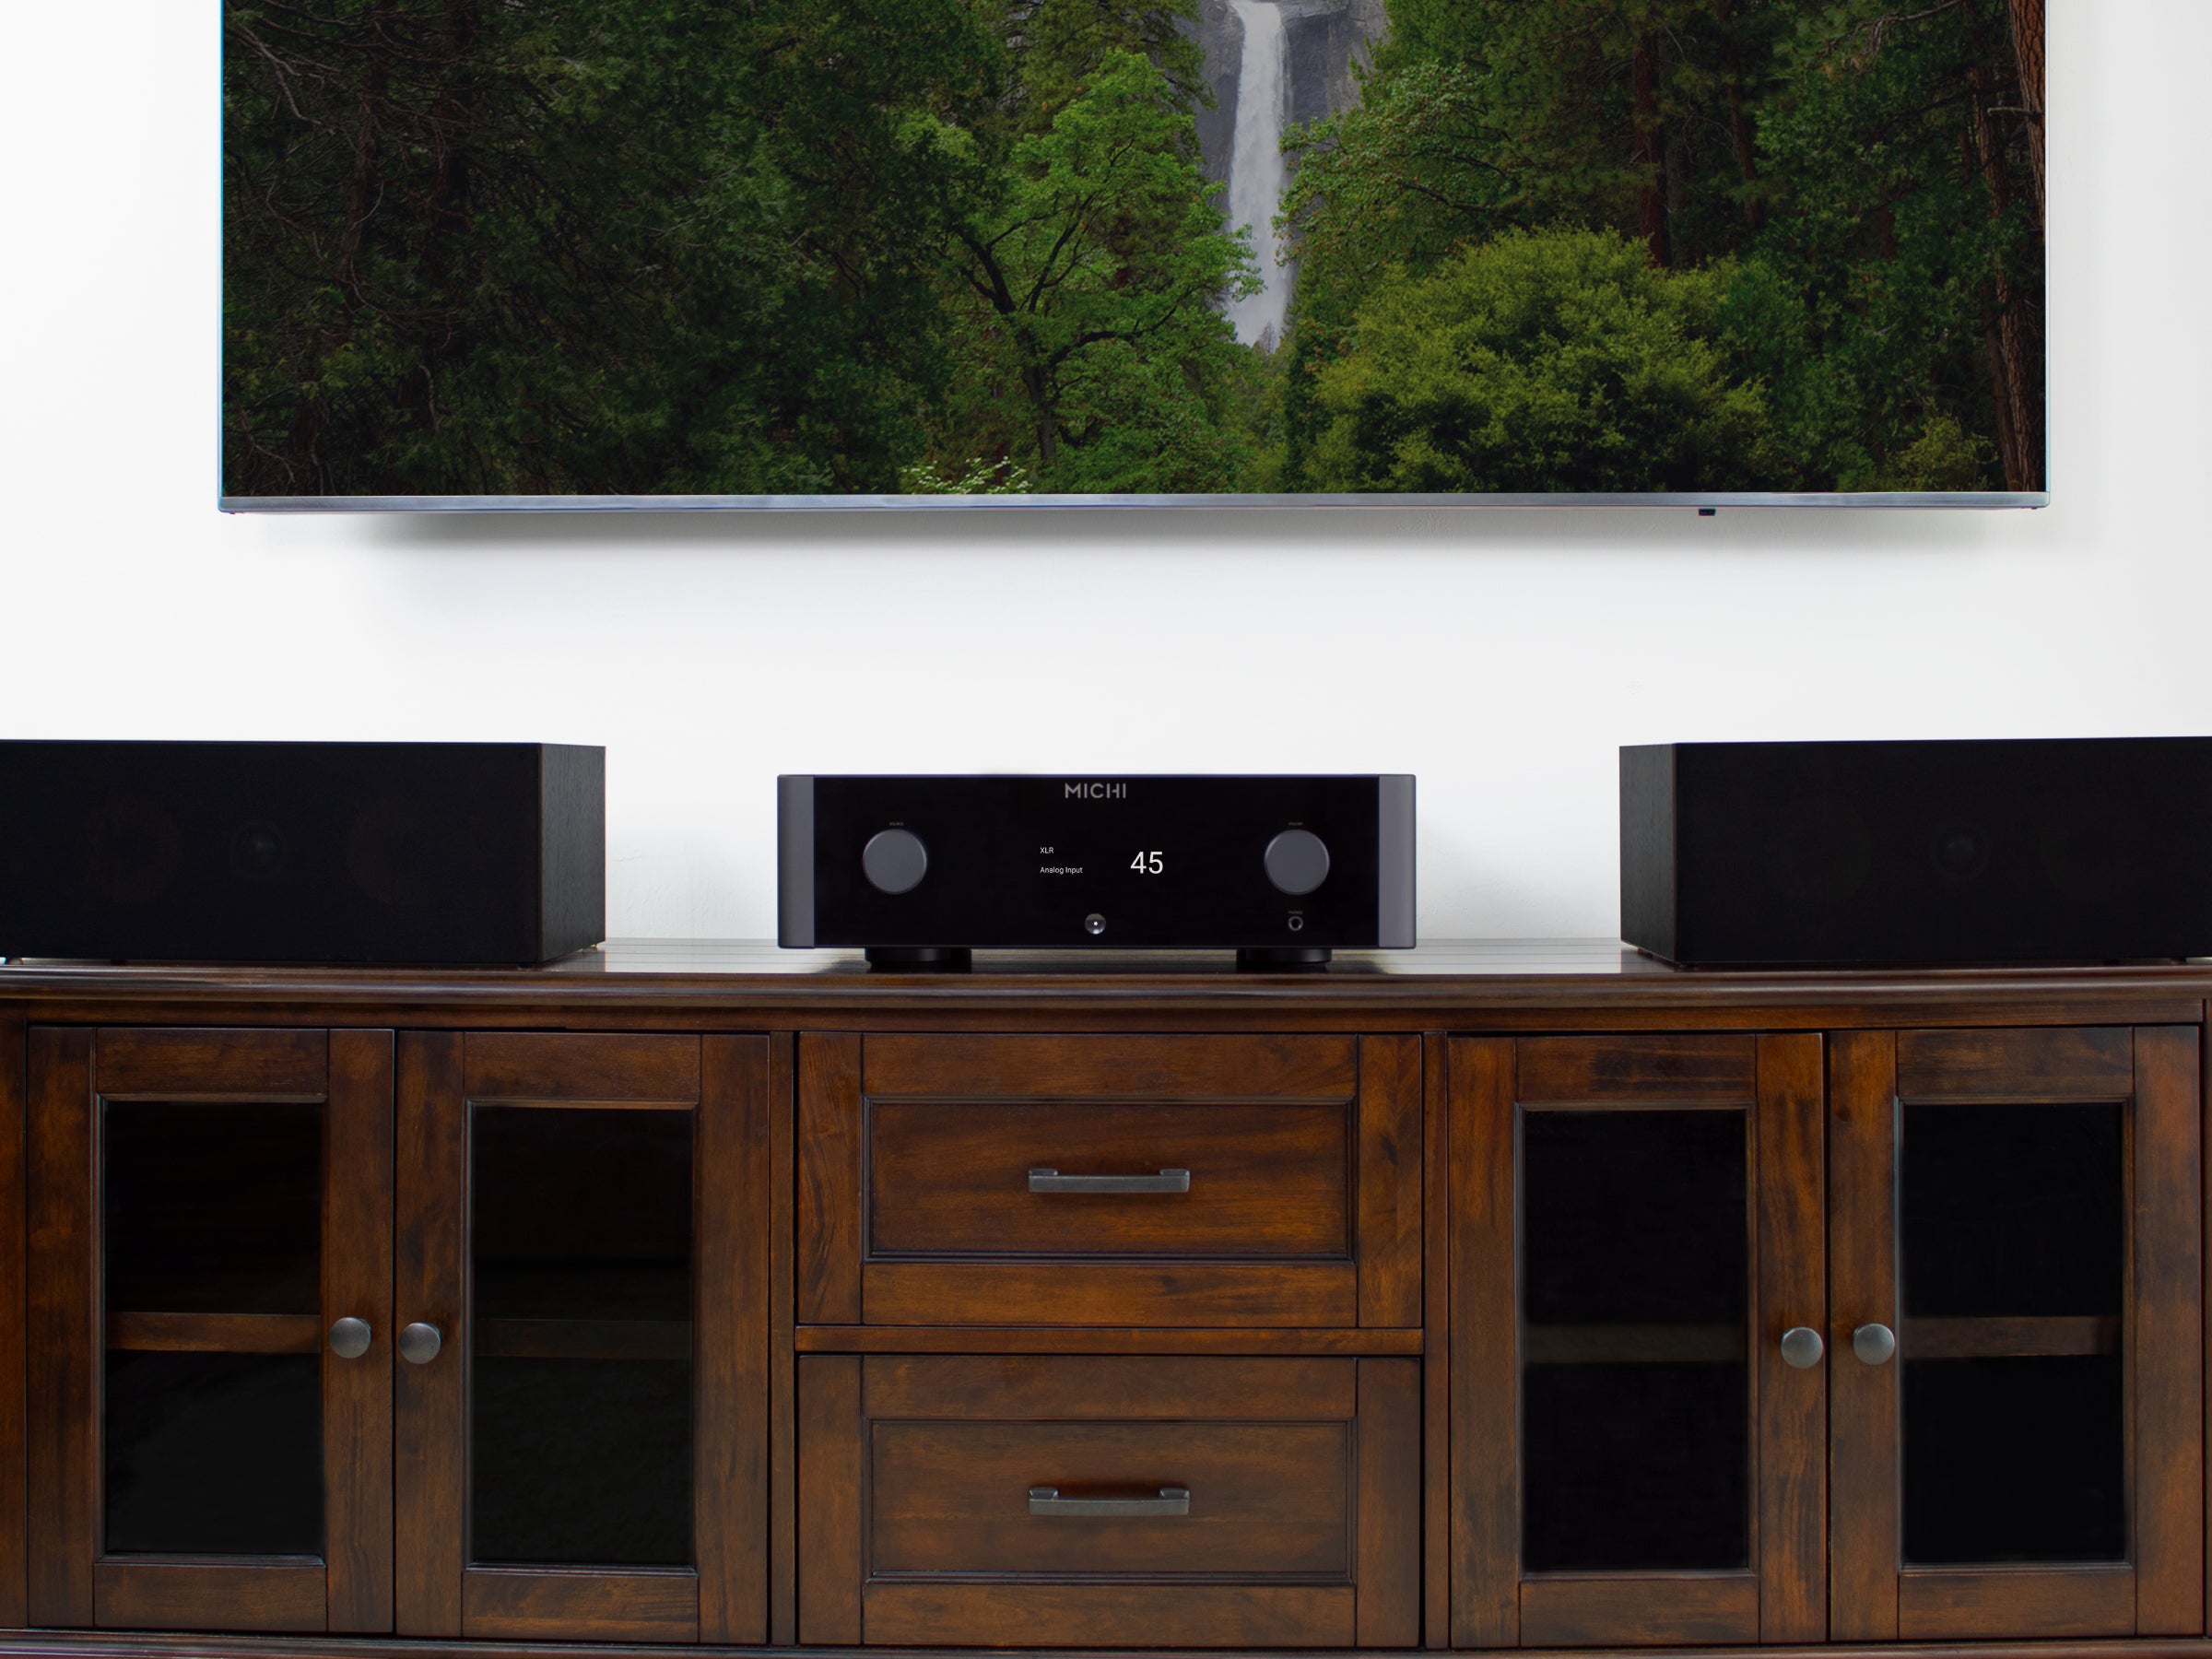 Rotel MICHI X3 Series 2 Integrated Amplifier